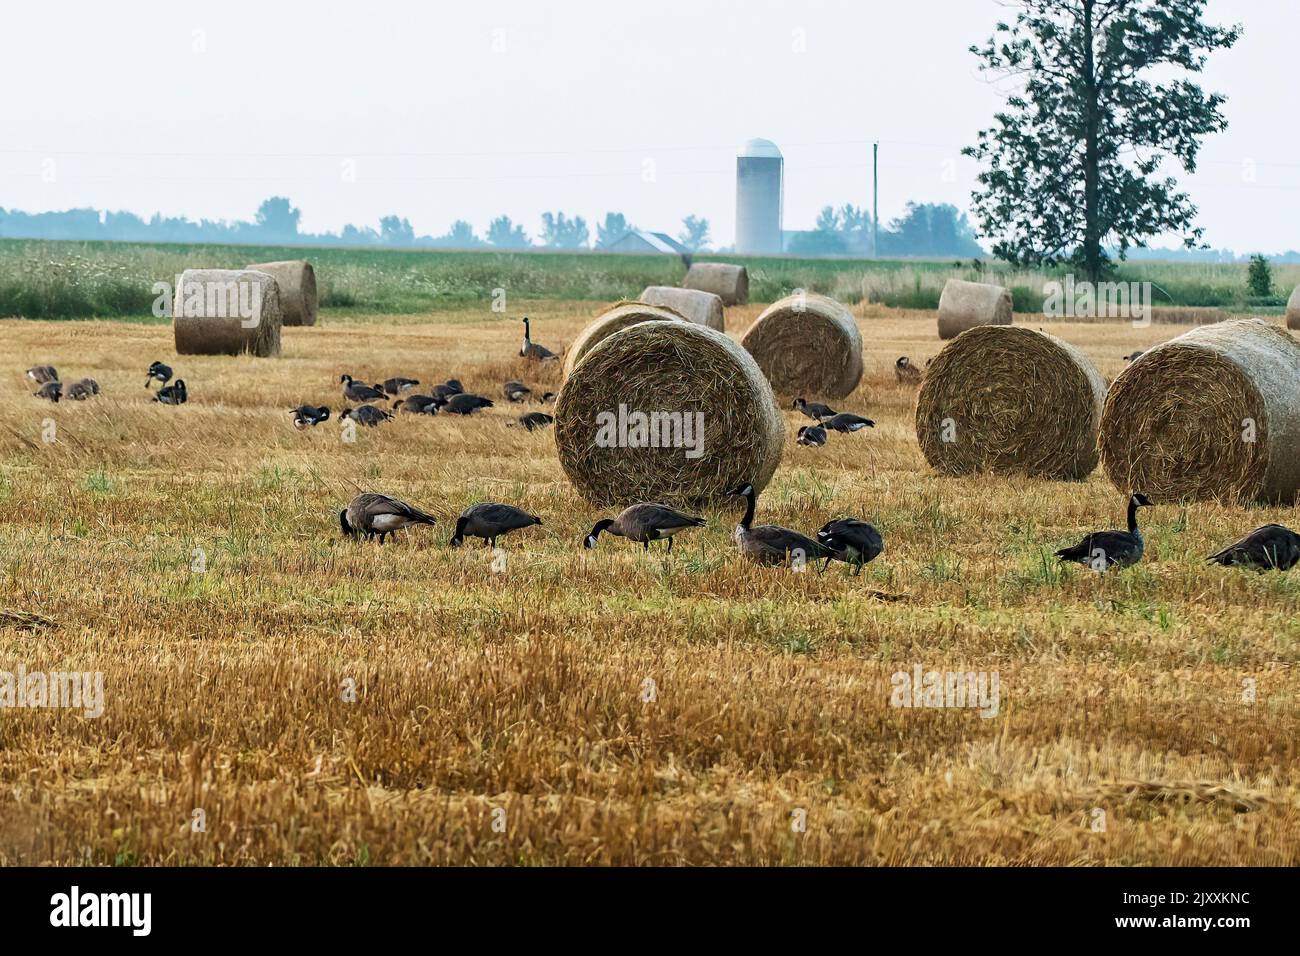 Farm field with hay bales and Canada geese in Ontario Canada Stock Photo